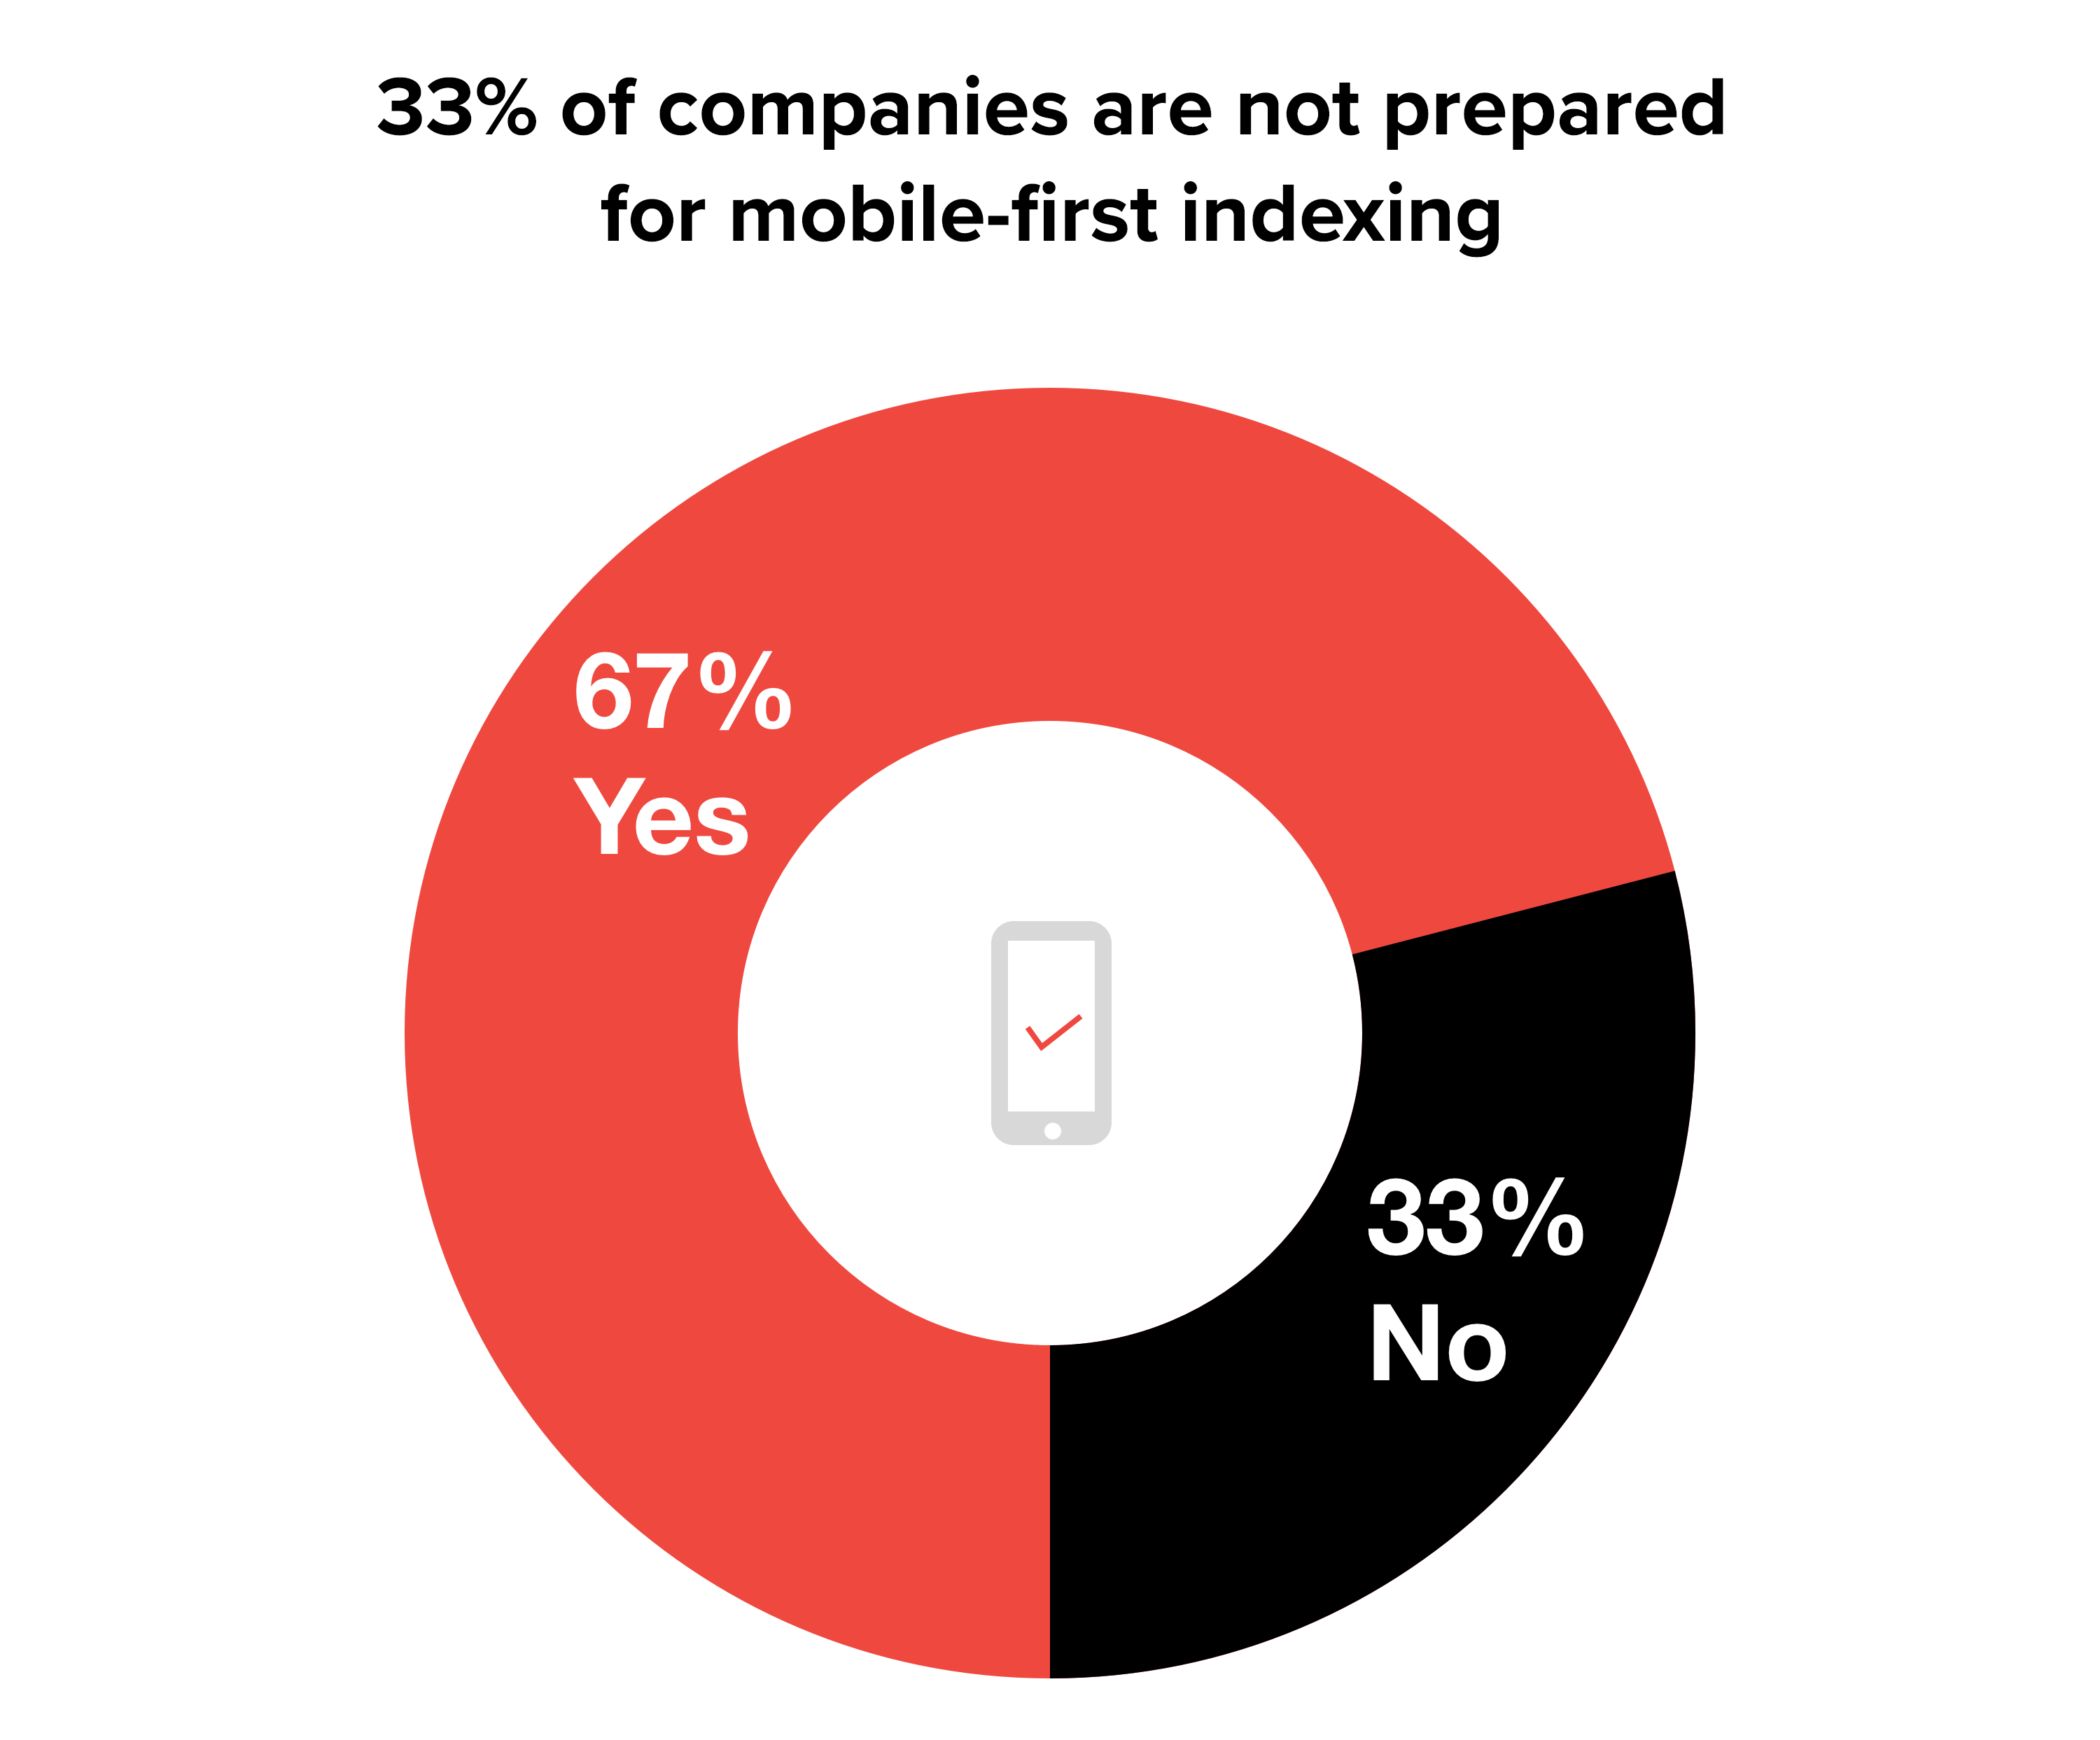 33 percent of companies are not prepared for mobile-first indexing